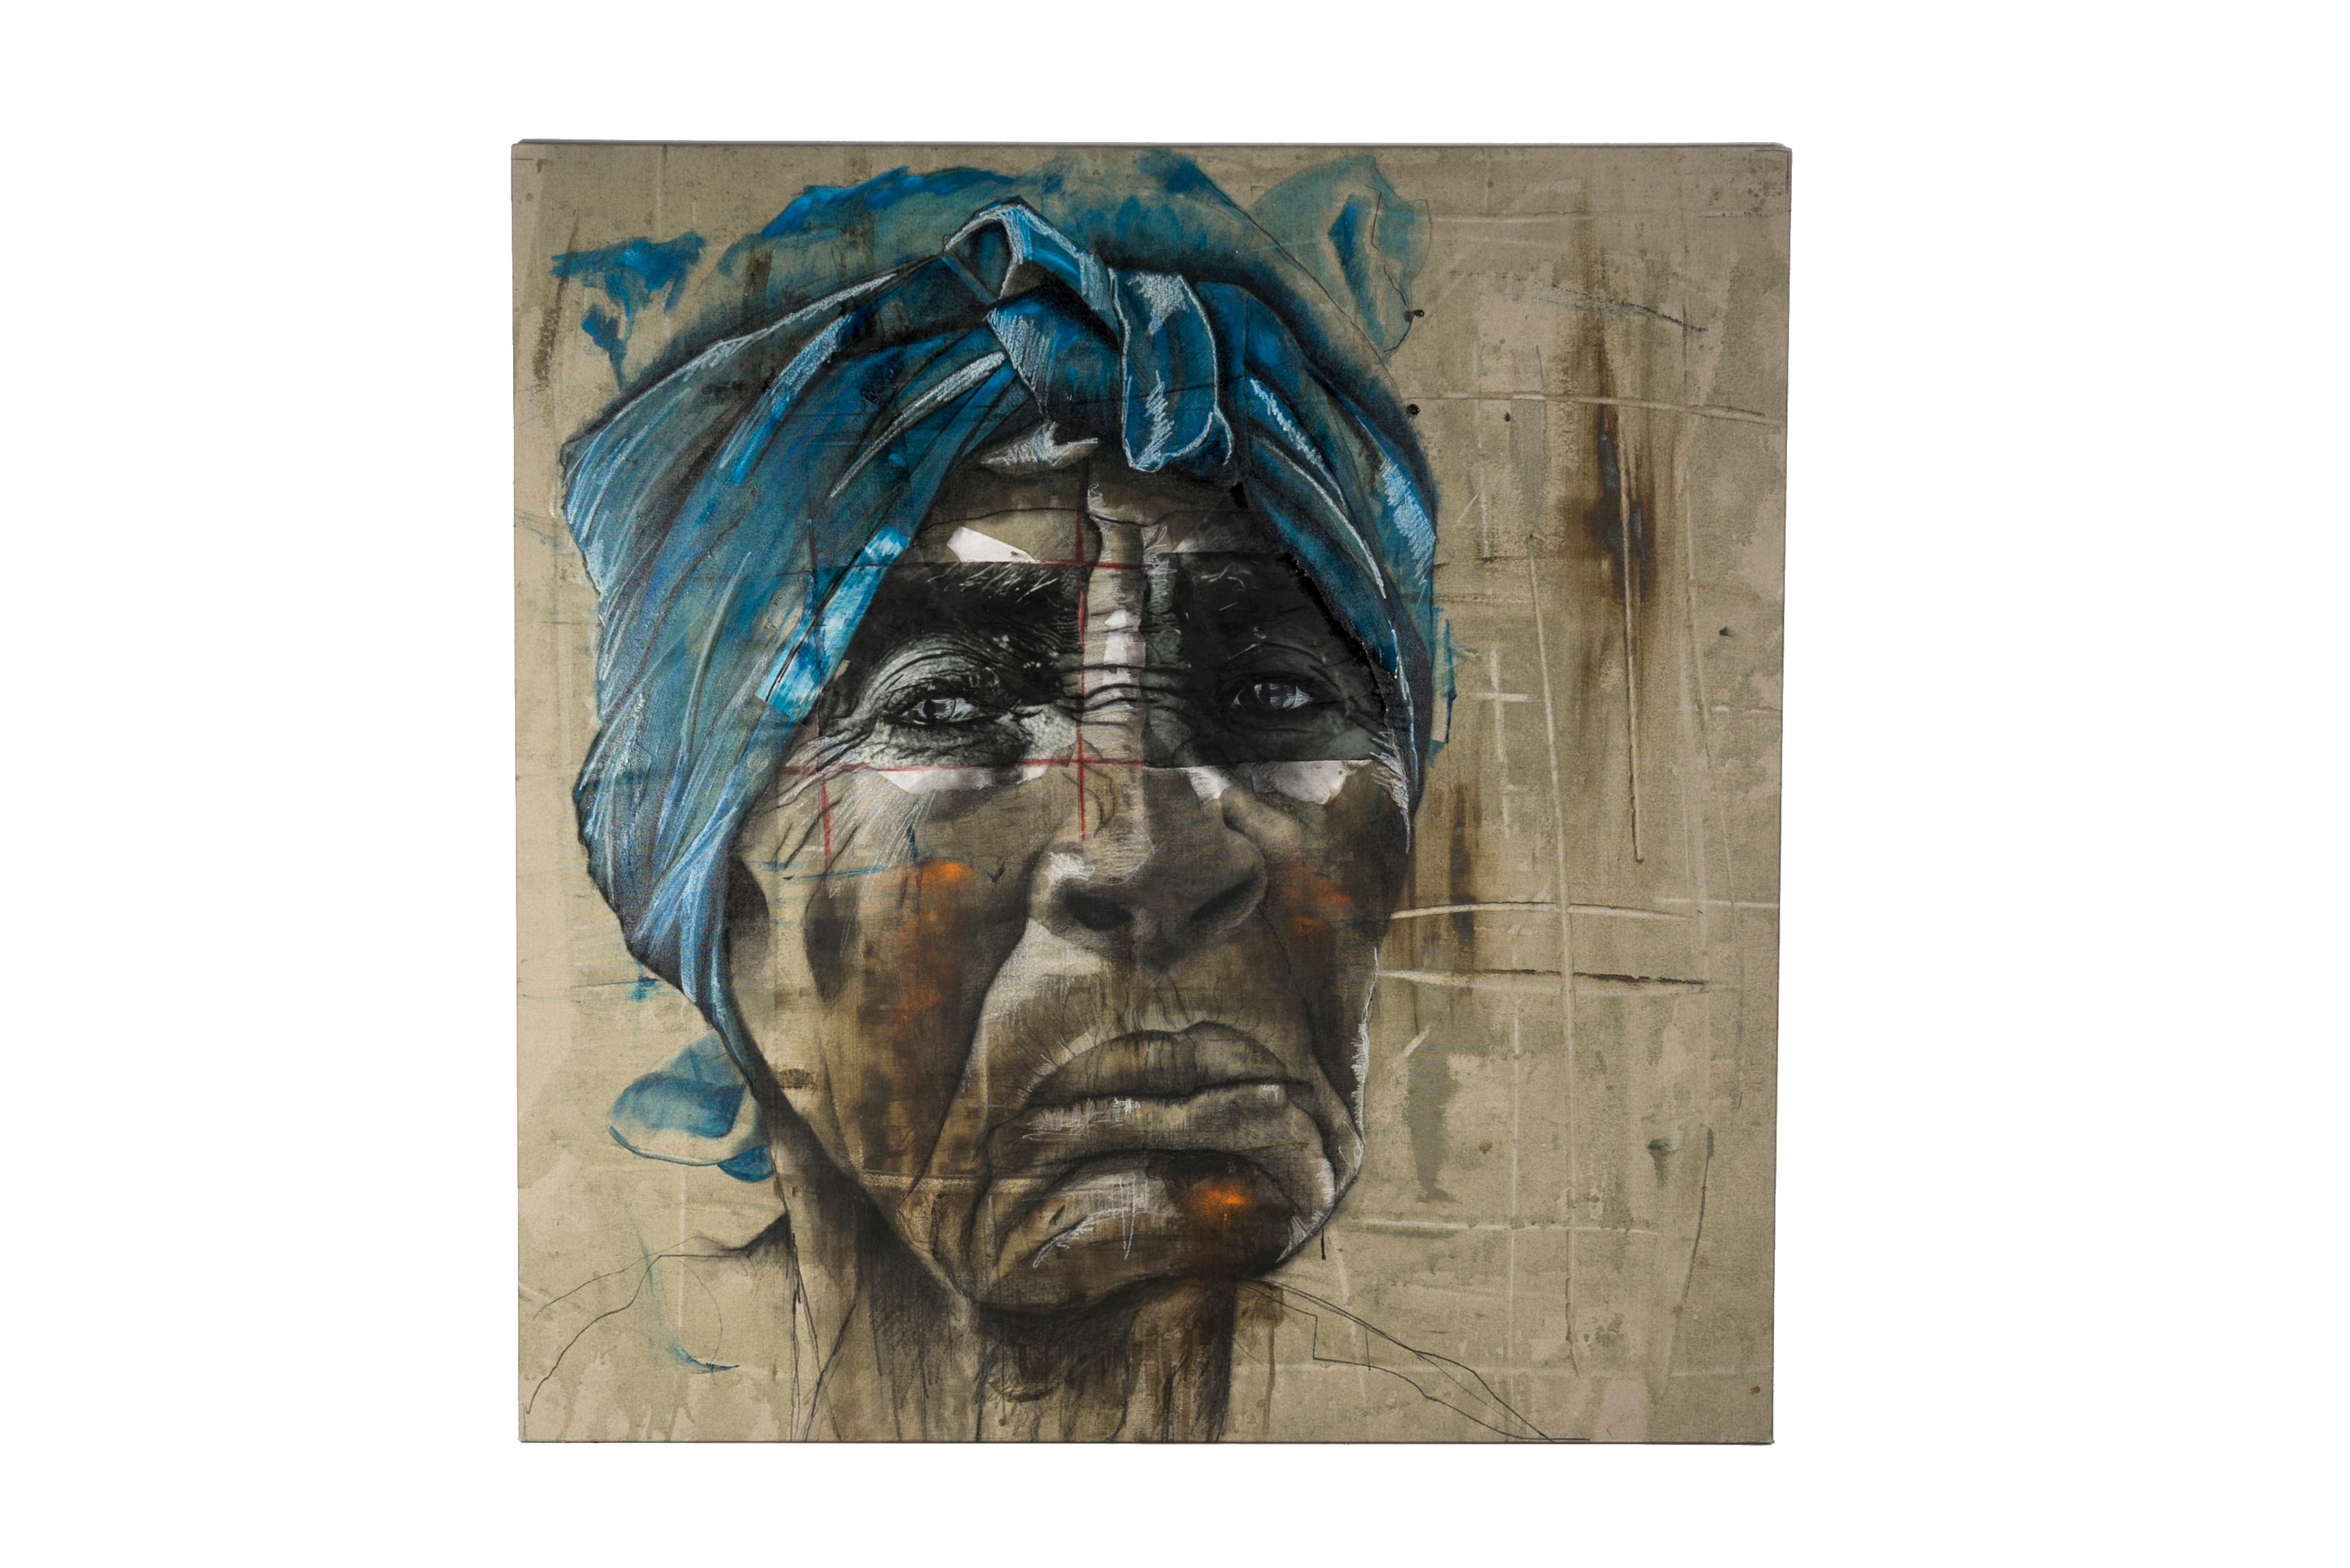 Very nice painting showing an old African woman
by Virginie Gaillet.